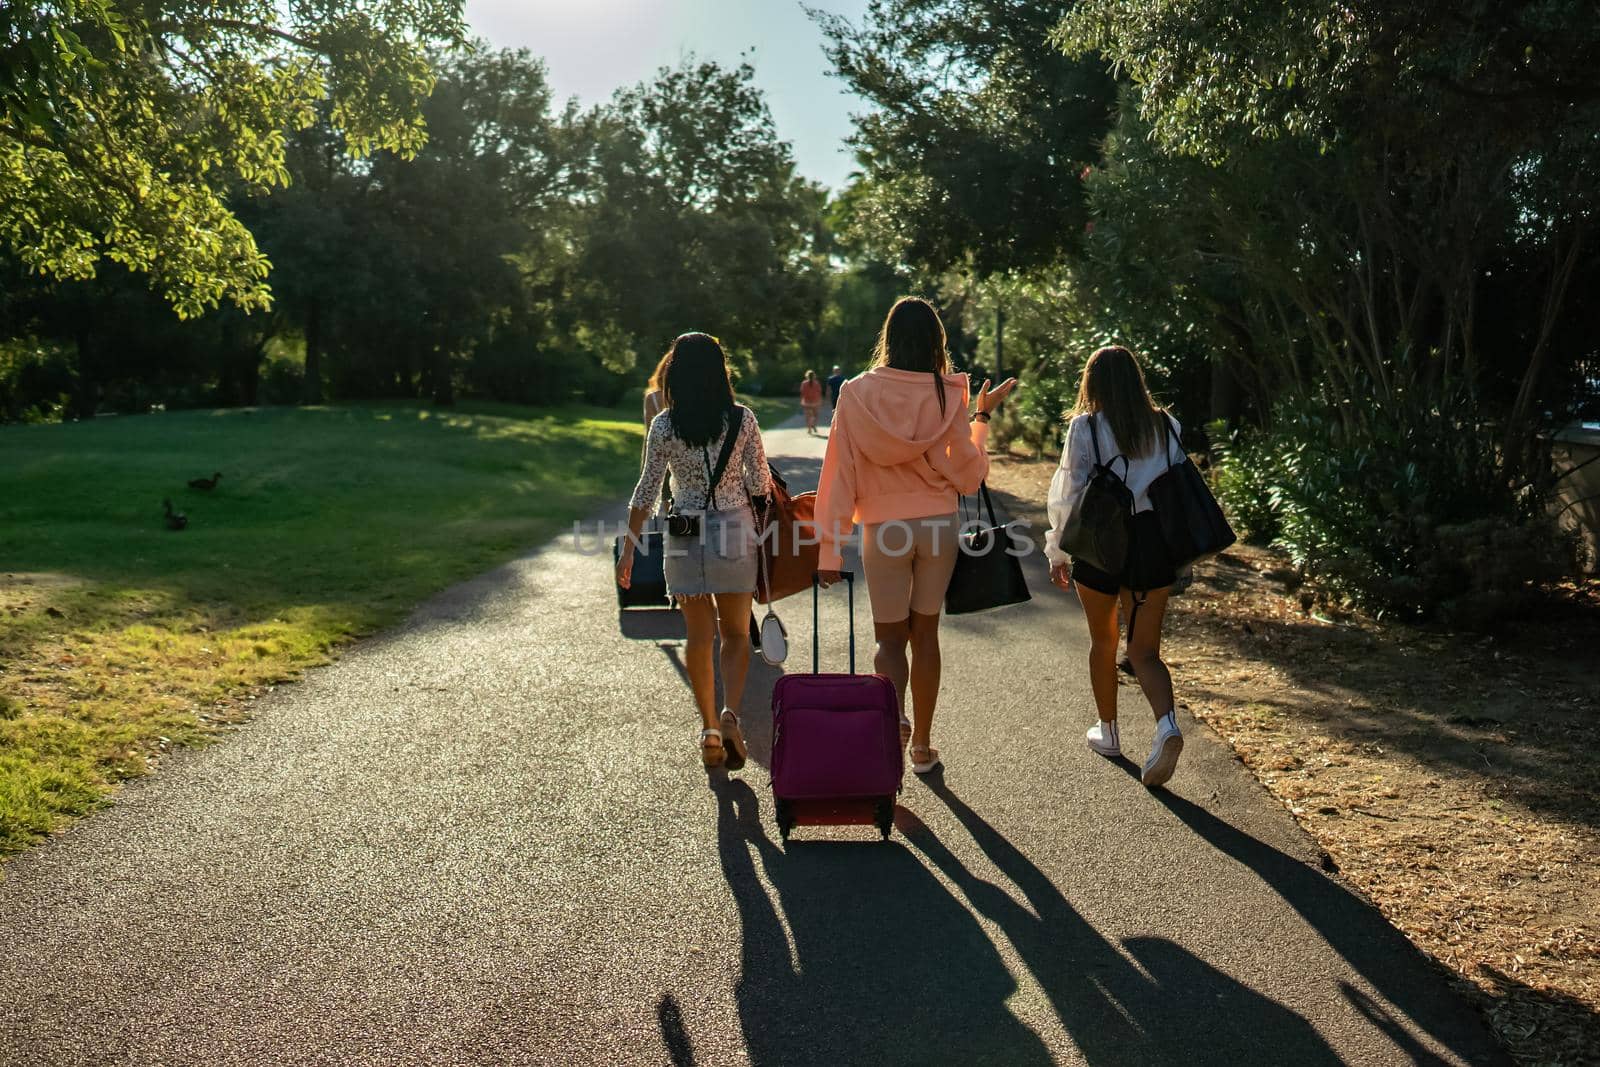 Three young best beautiful friends just arrived in the vacation city park resort view from back walking holding bags and trolleys searching for destination. Happy women traveller from behind in nature